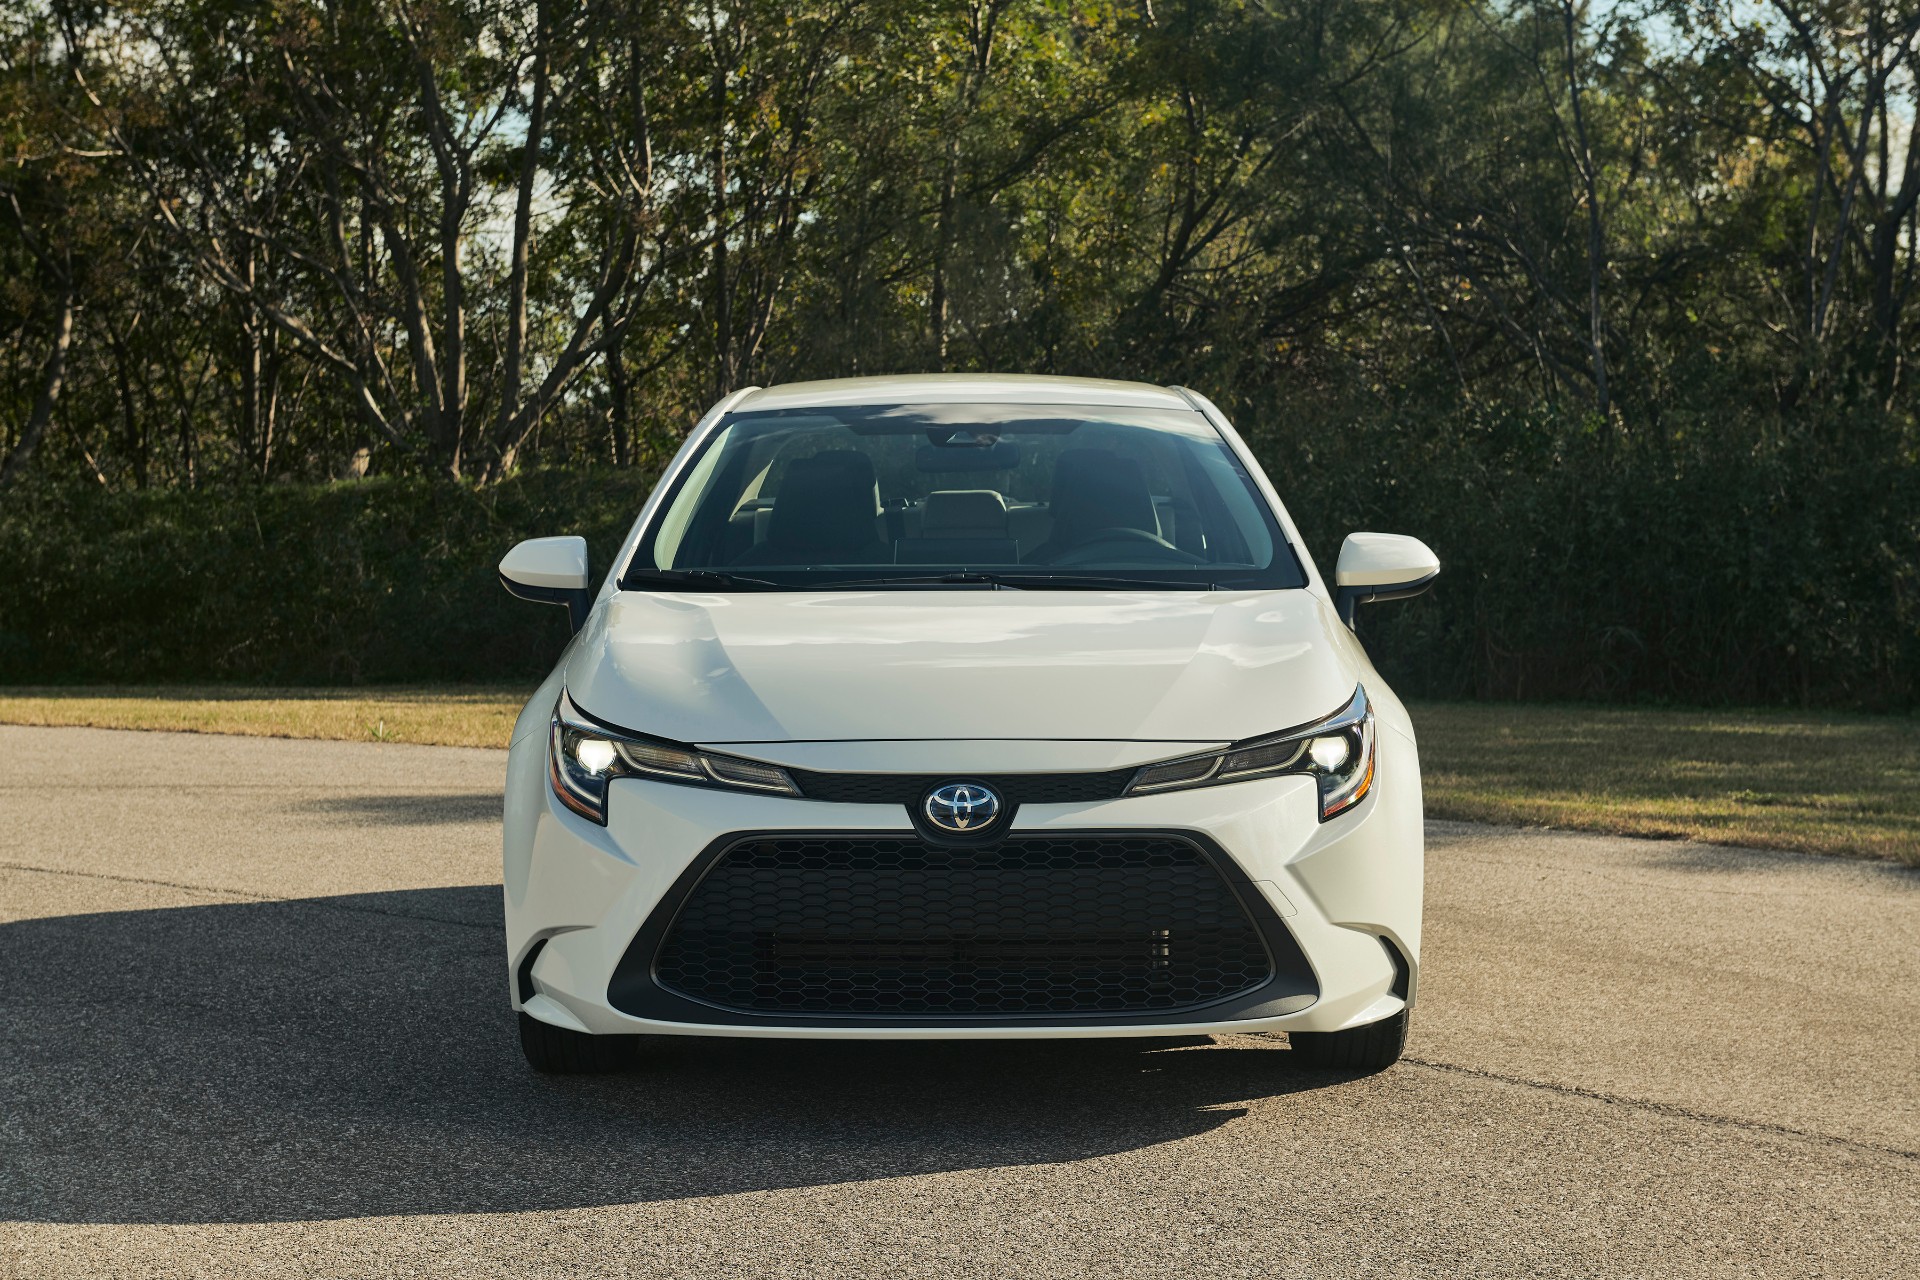 toyota corolla hybrid rated 52 mpg why toyota says it won t cannibalize prius sales toyota corolla hybrid rated 52 mpg why